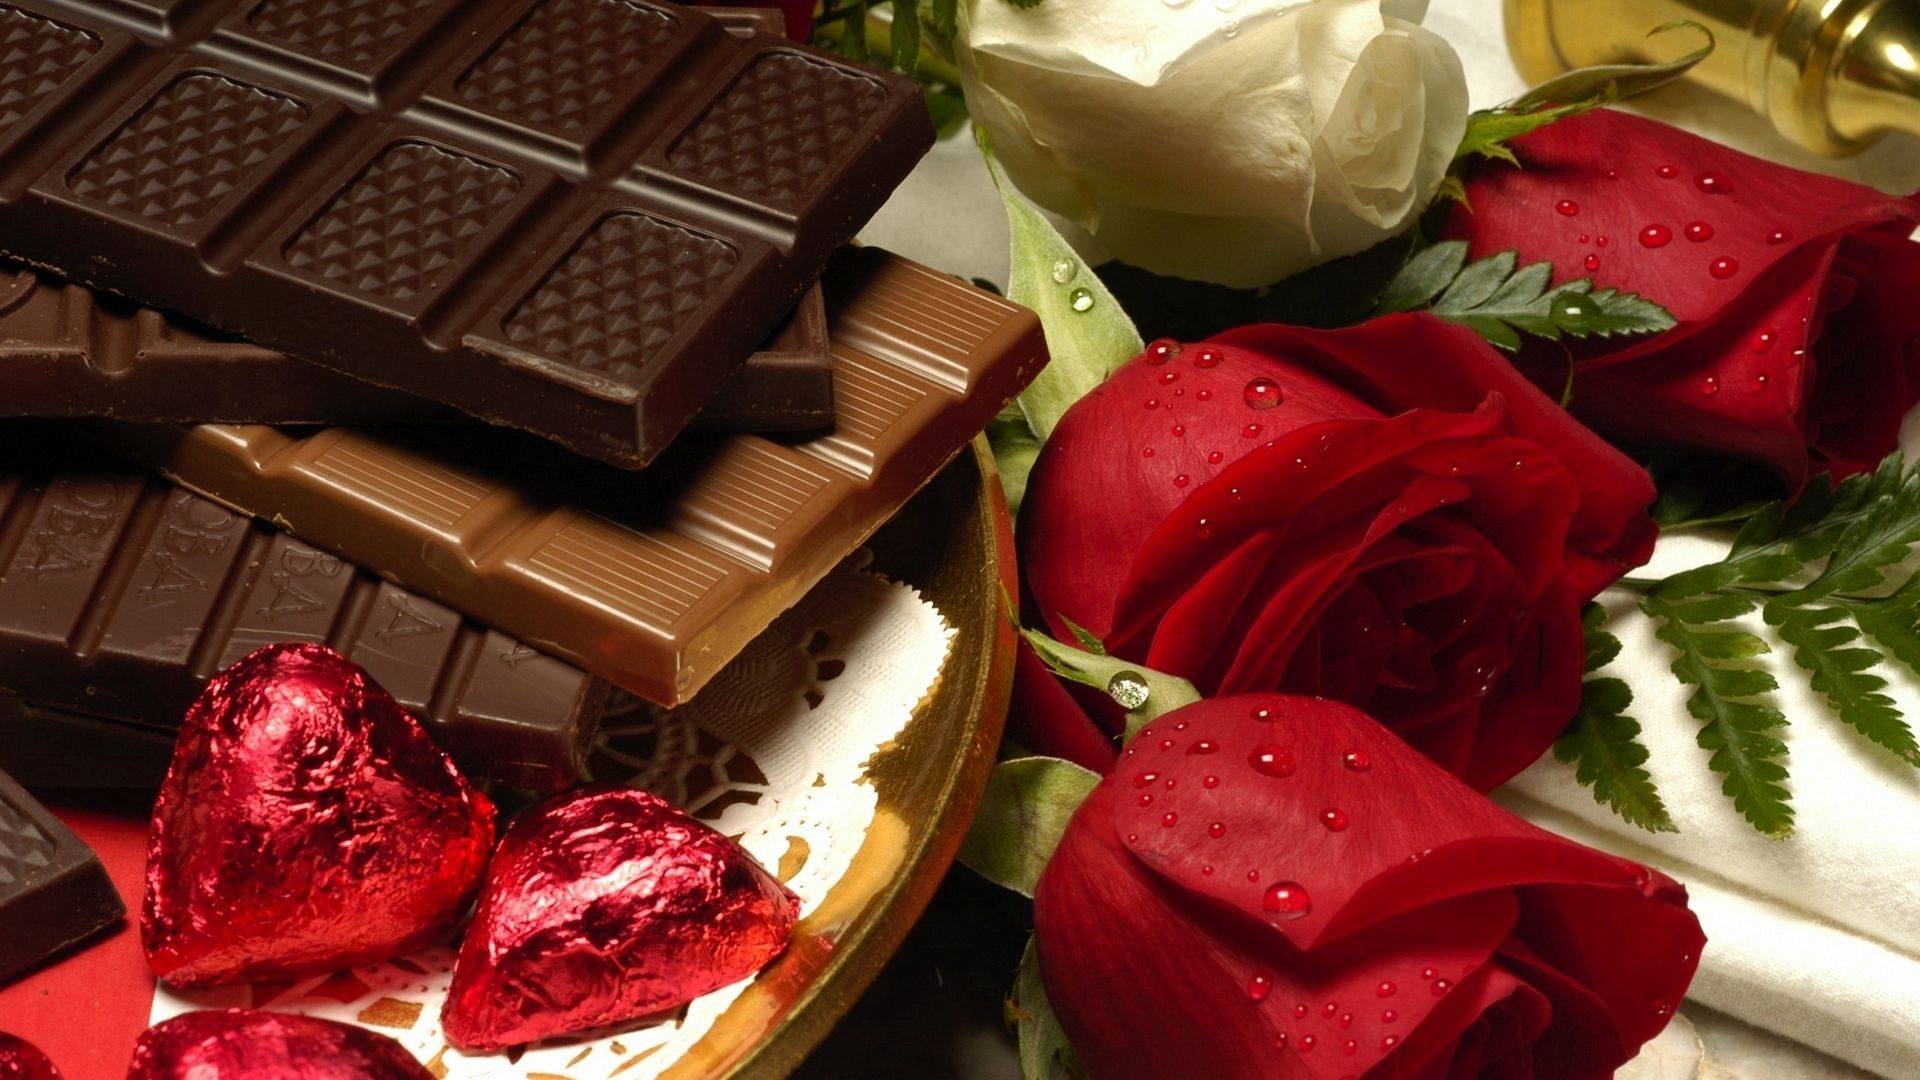 Download wallpaper 1920x1080 chocolate, flowers, roses full hd, hdtv, fhd,  1080p hd background